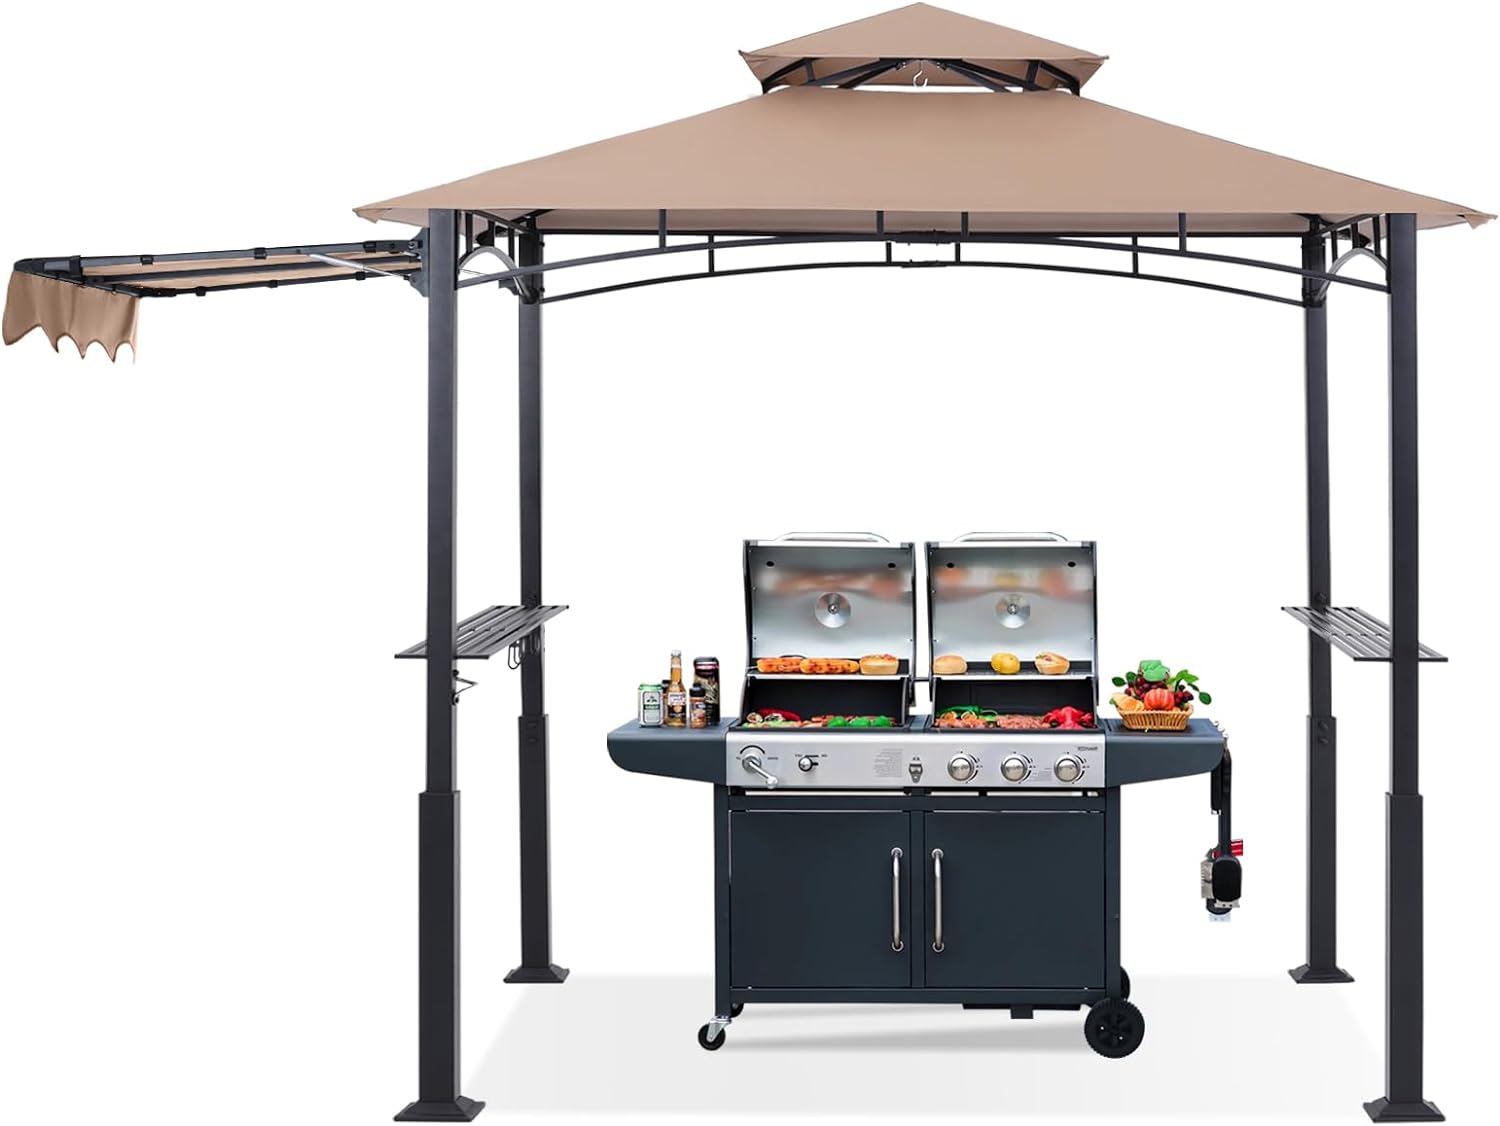 ABCCANOPY 5x8 Outdoor Grill Gazebo with Extra Awning BBQ Canopy with LED Lights